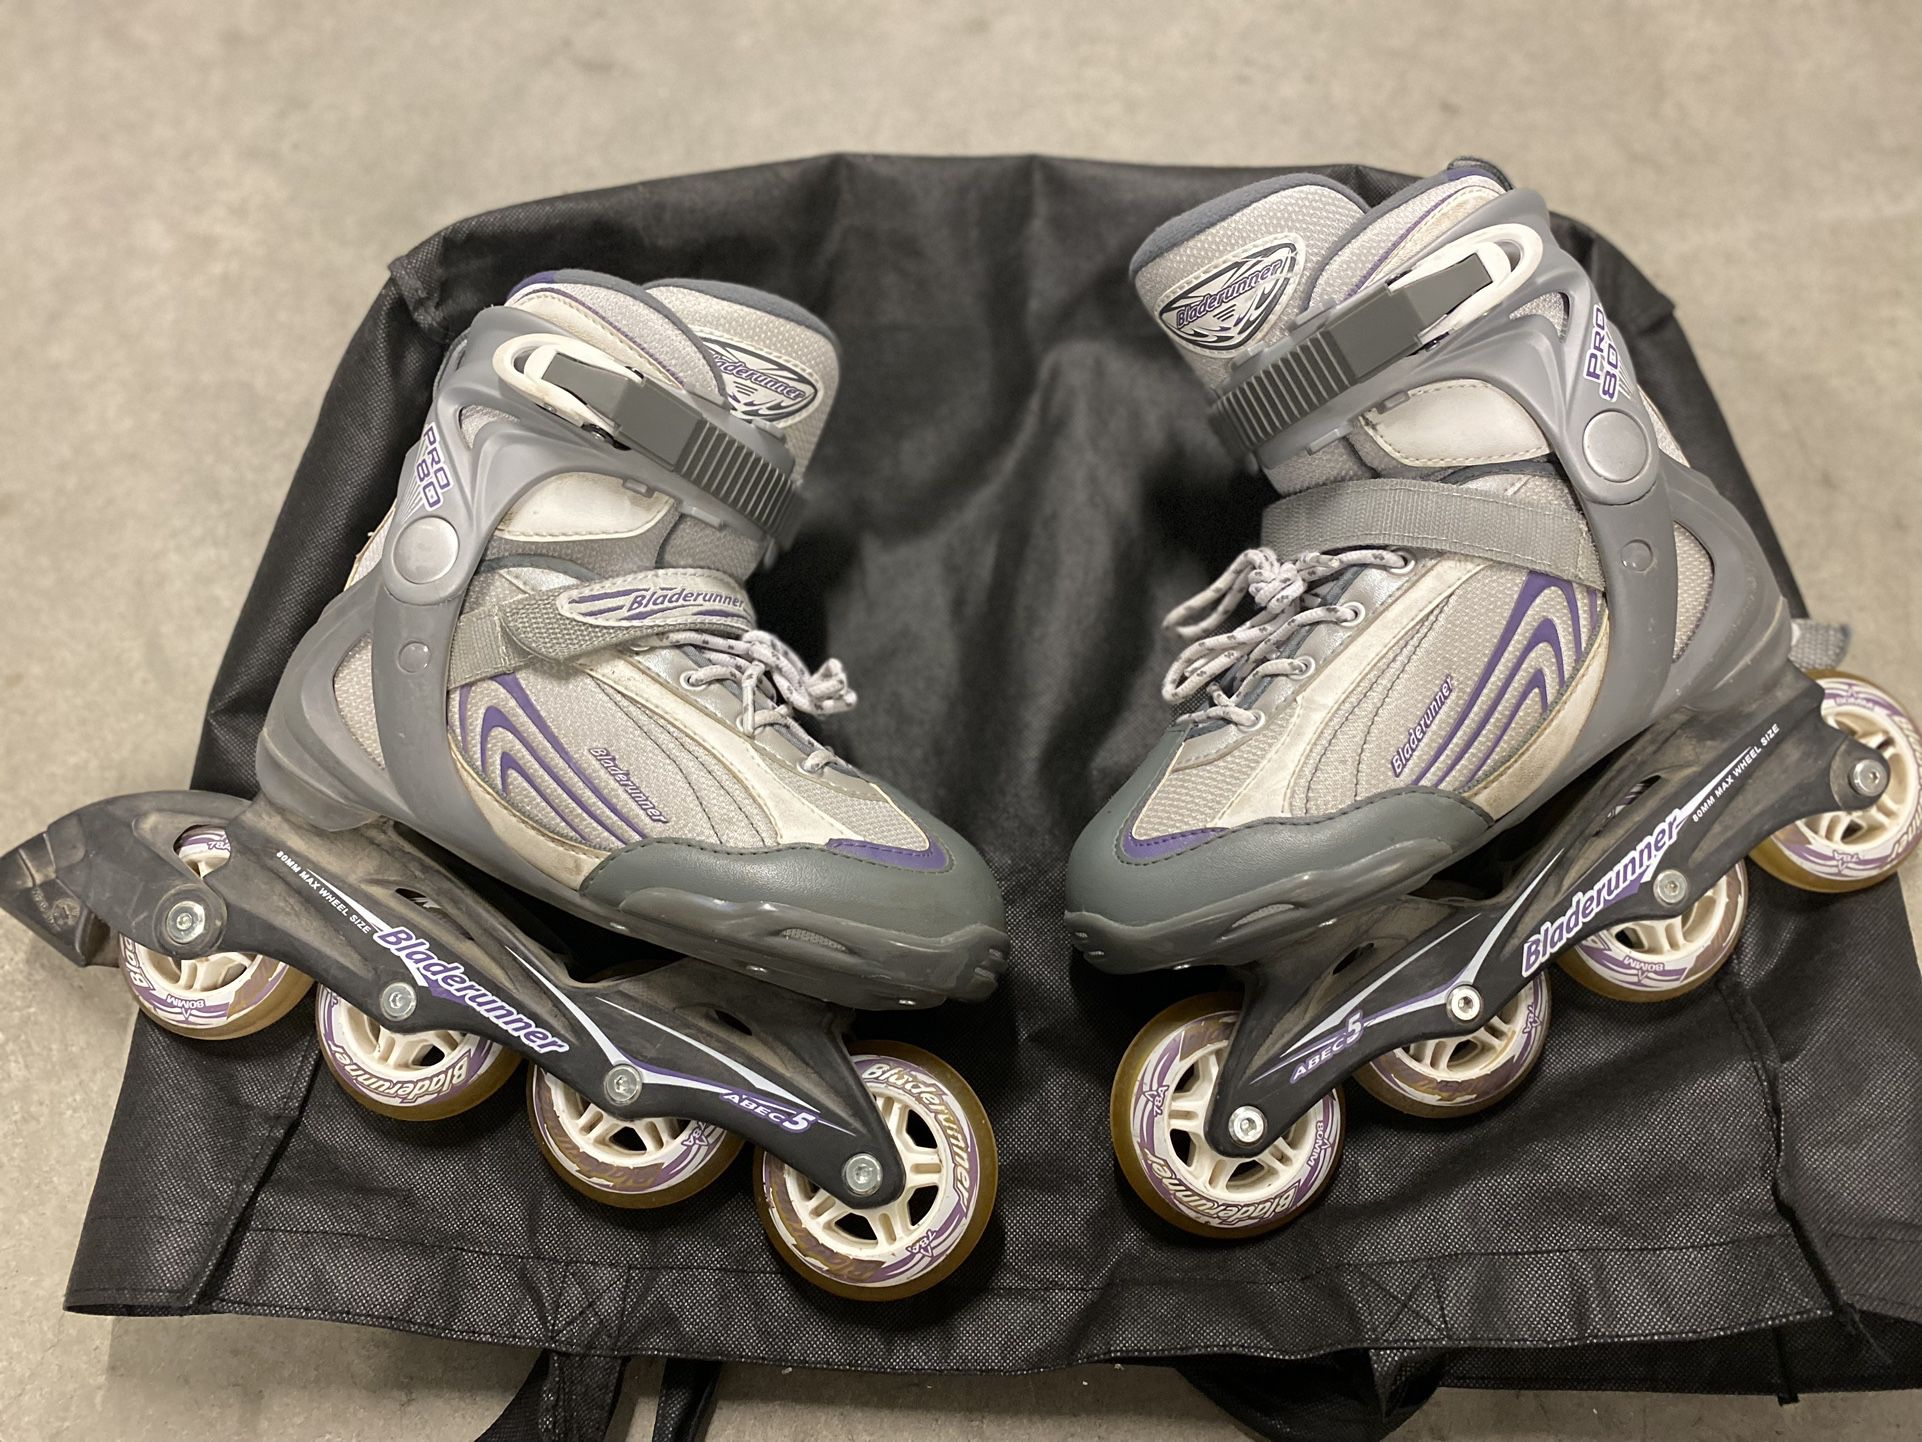 Great rollerblades Pro